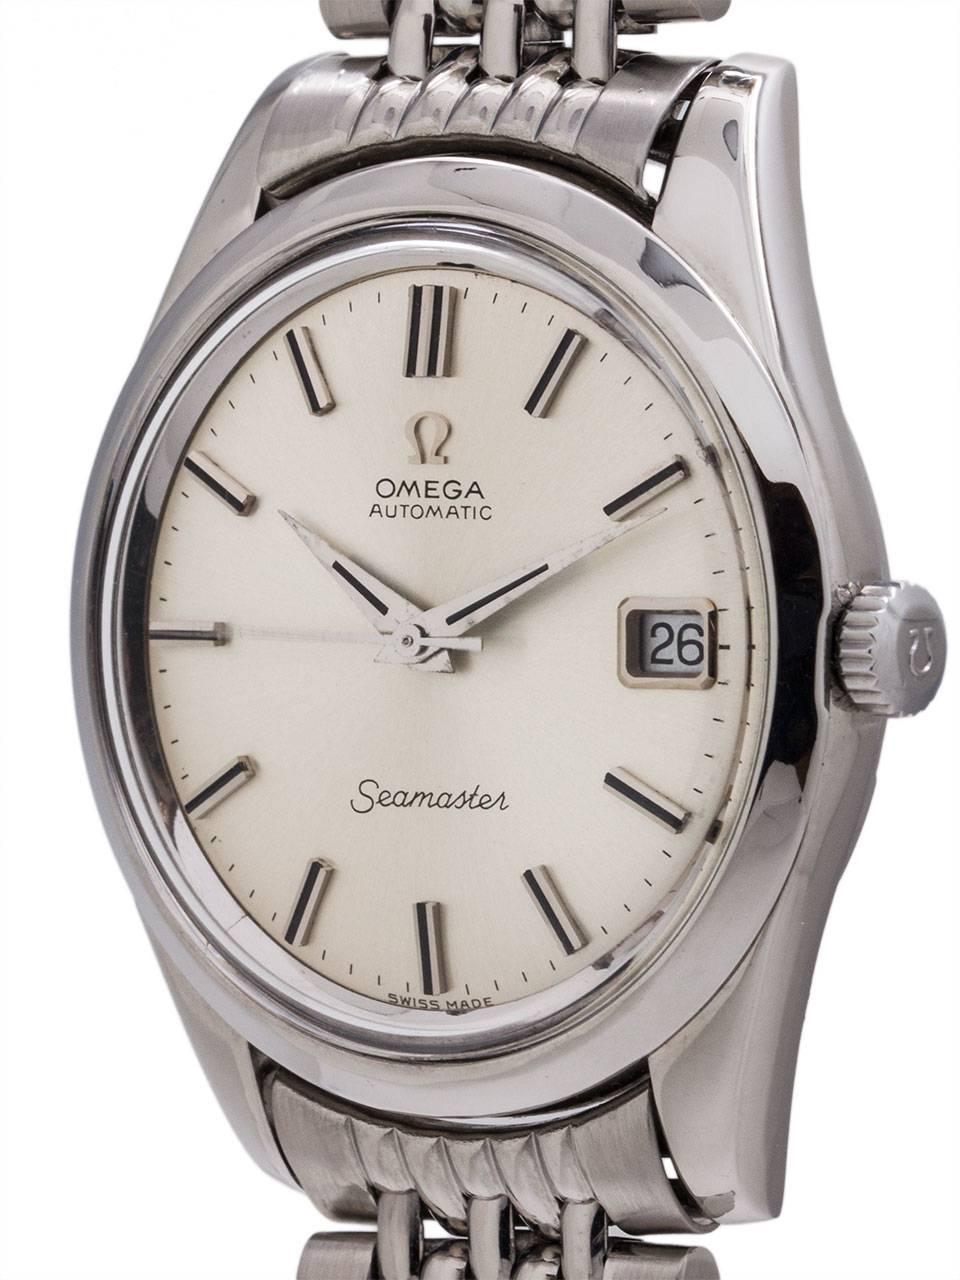 
Omega Stainless Steel Seamaster Automatic ref 166010 circa 1968. 36 x 43mm diameter case with smooth bezel and acrylic crystal. Signed Omega crown and embossed sea monster logo case back. Silvered satin dial with applied lindens and pointed hands.